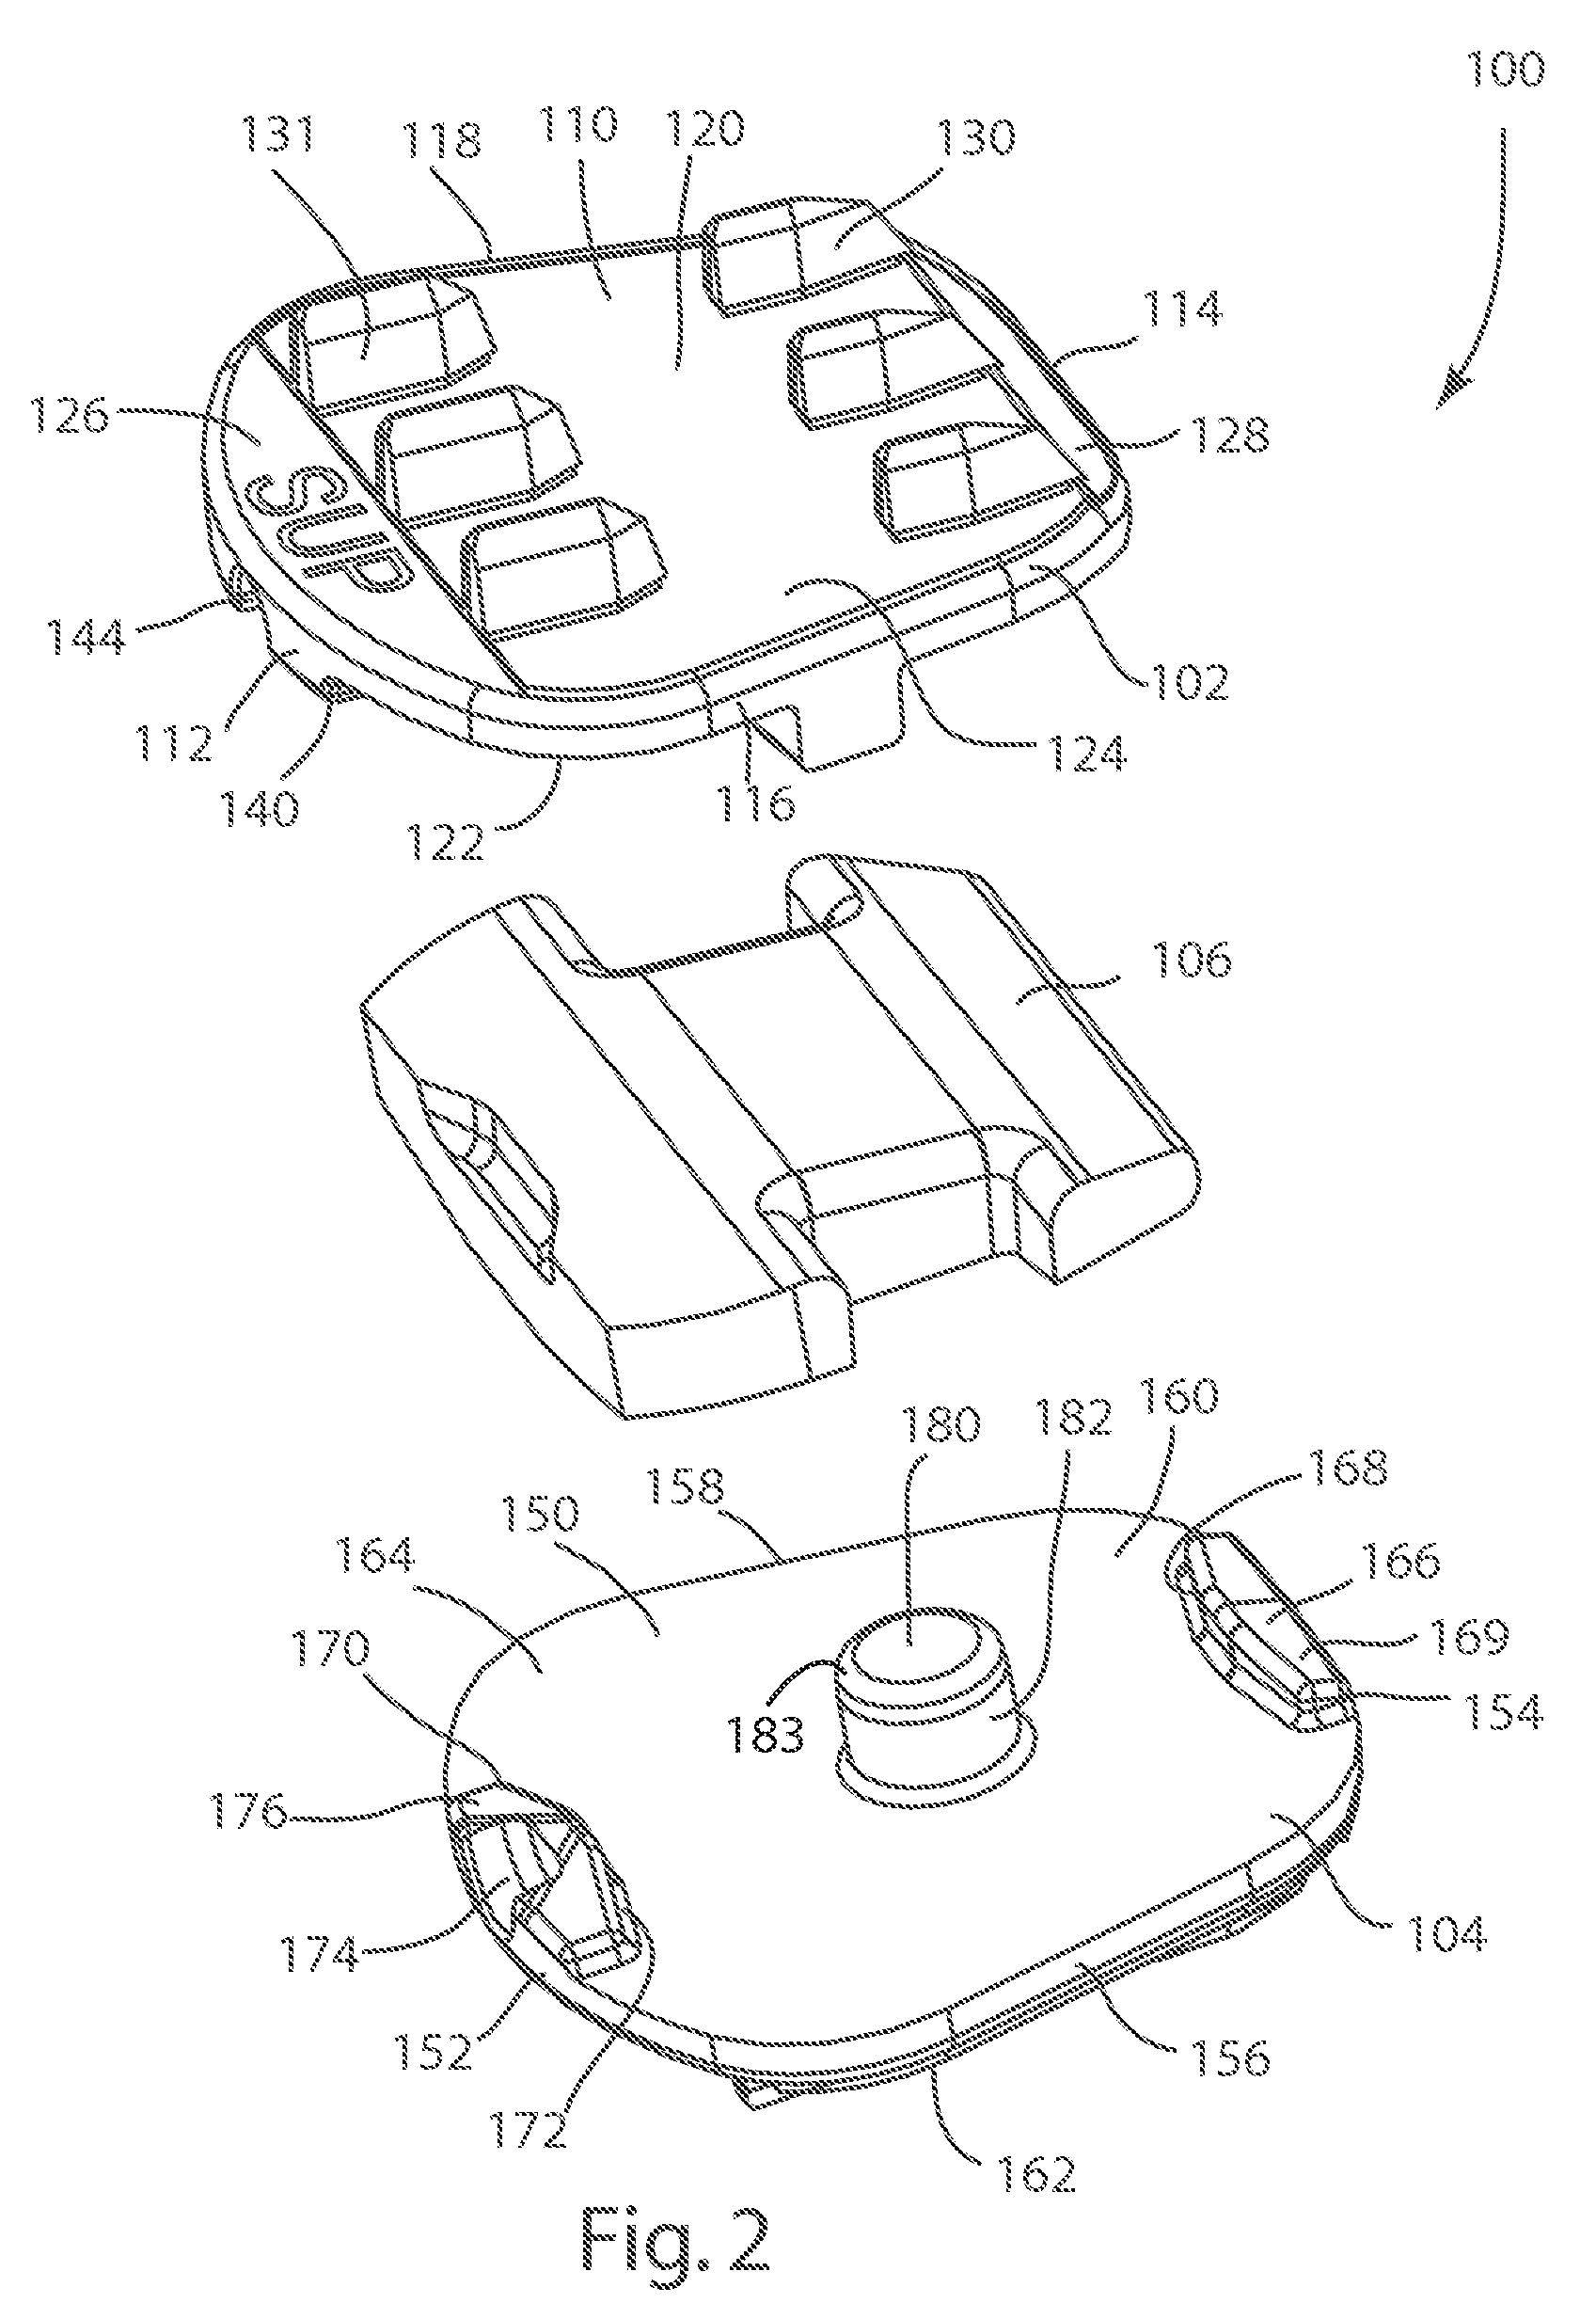 Systems and Methods for Vertebral Disc Replacement